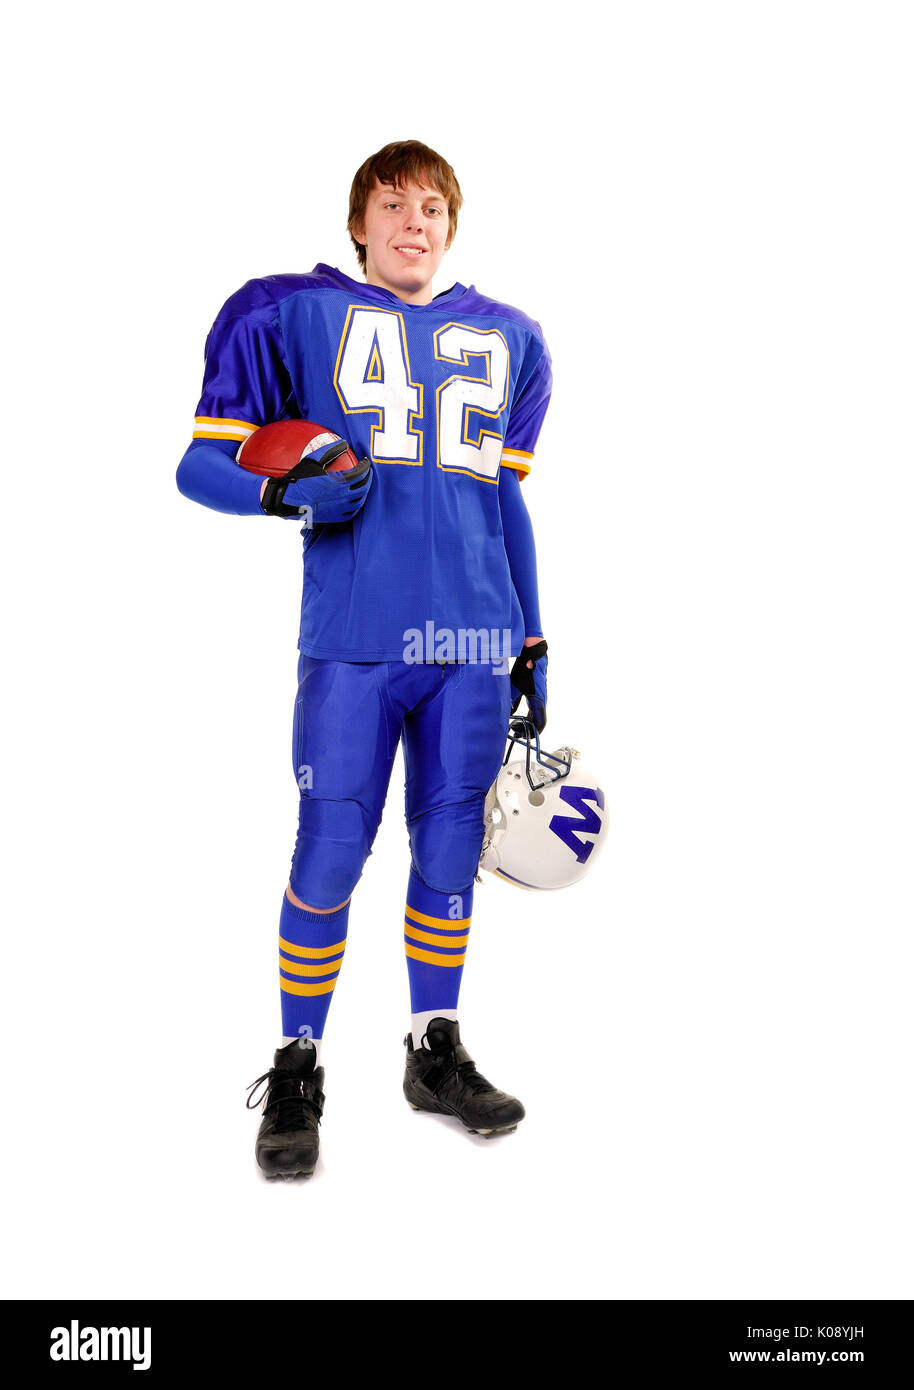 American style football player standing in his jersey Stock Photo - Alamy